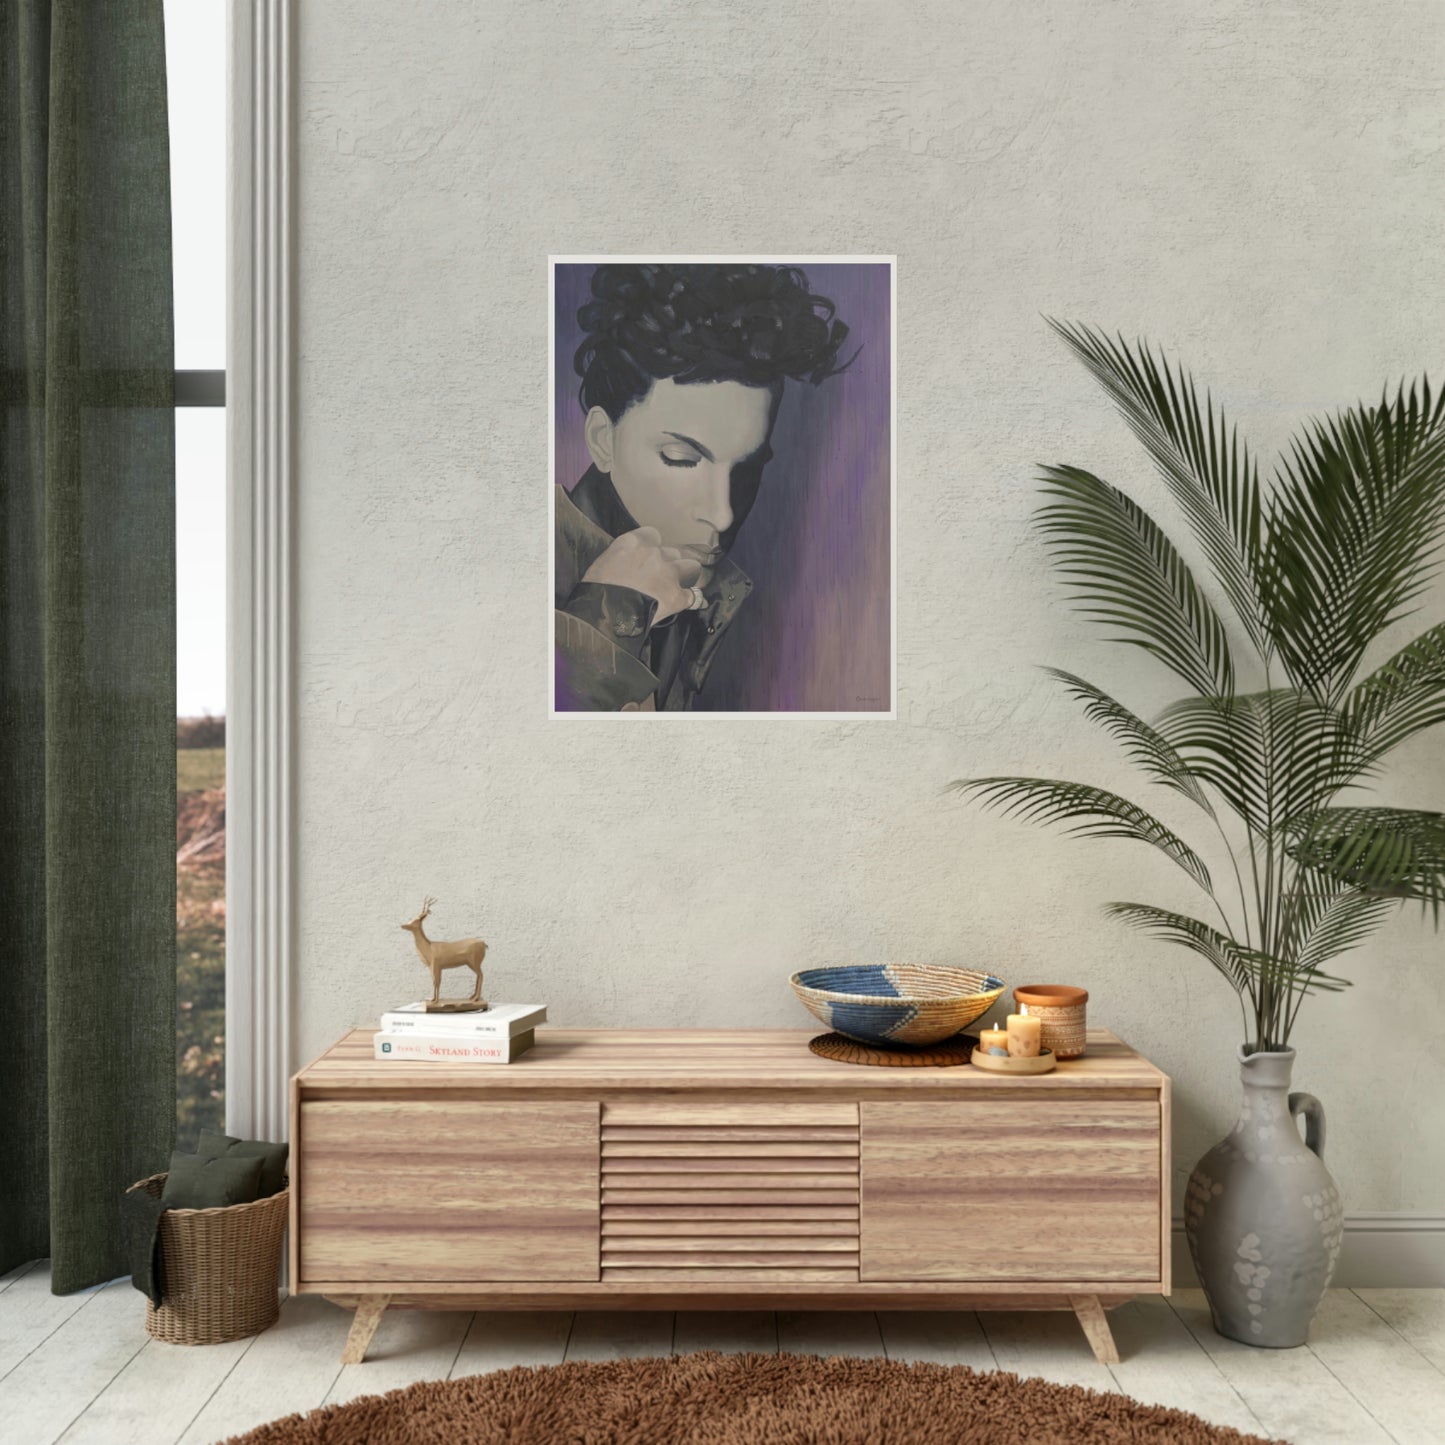 Prince print on paper, 2 sizes